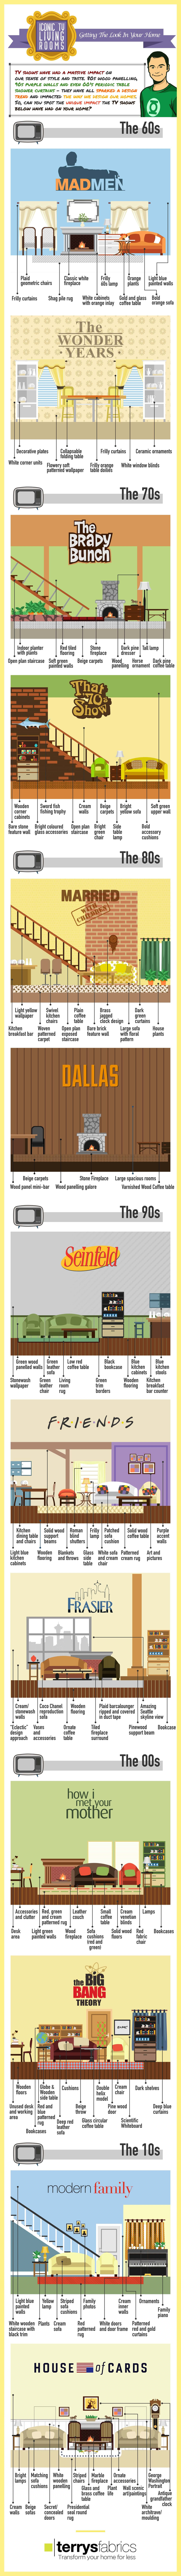 Iconic TV Living Rooms